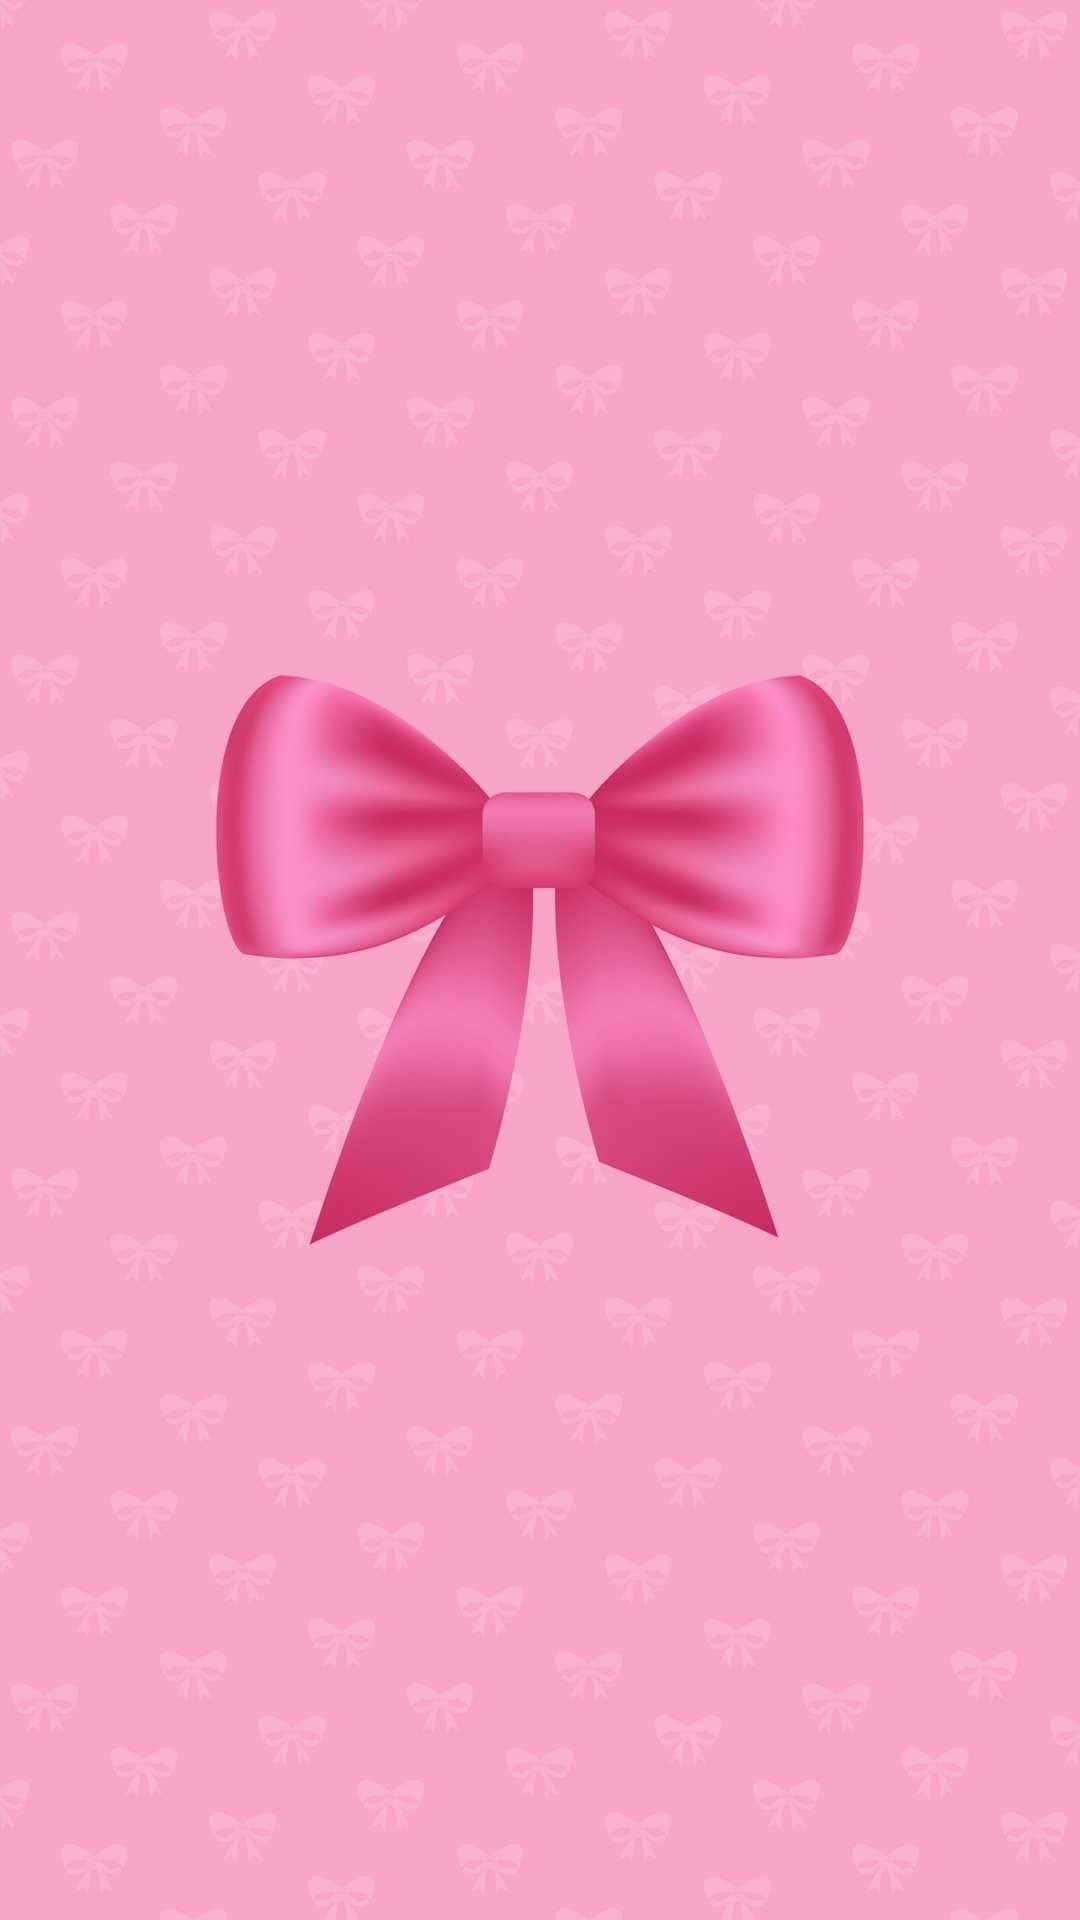 Pink Bow On A Pink Background Wallpaper